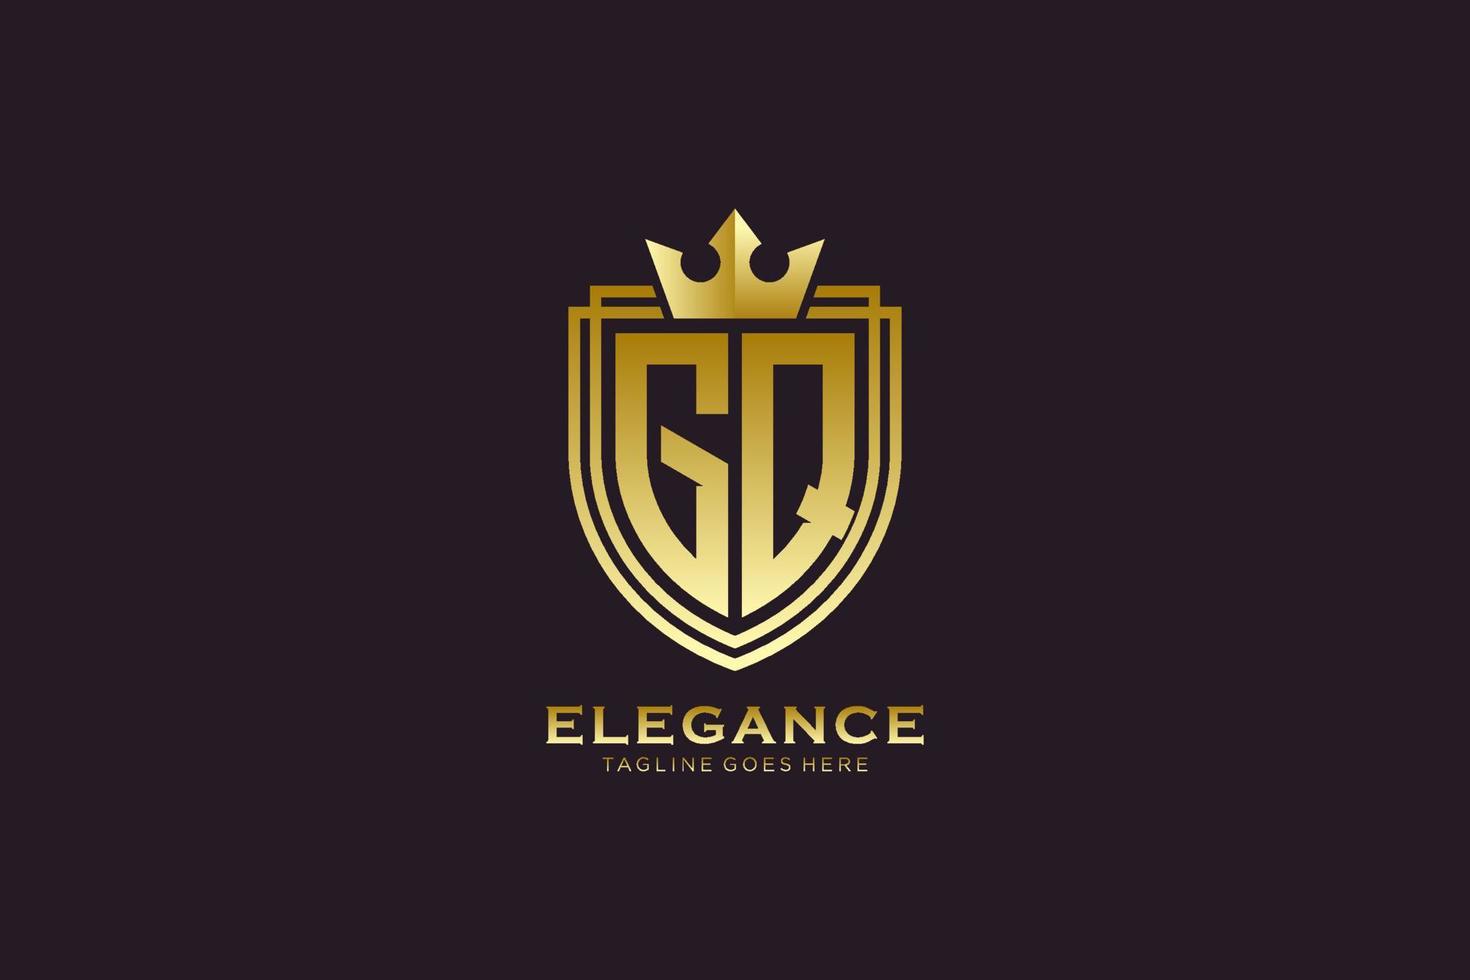 initial GQ elegant luxury monogram logo or badge template with scrolls and royal crown - perfect for luxurious branding projects vector